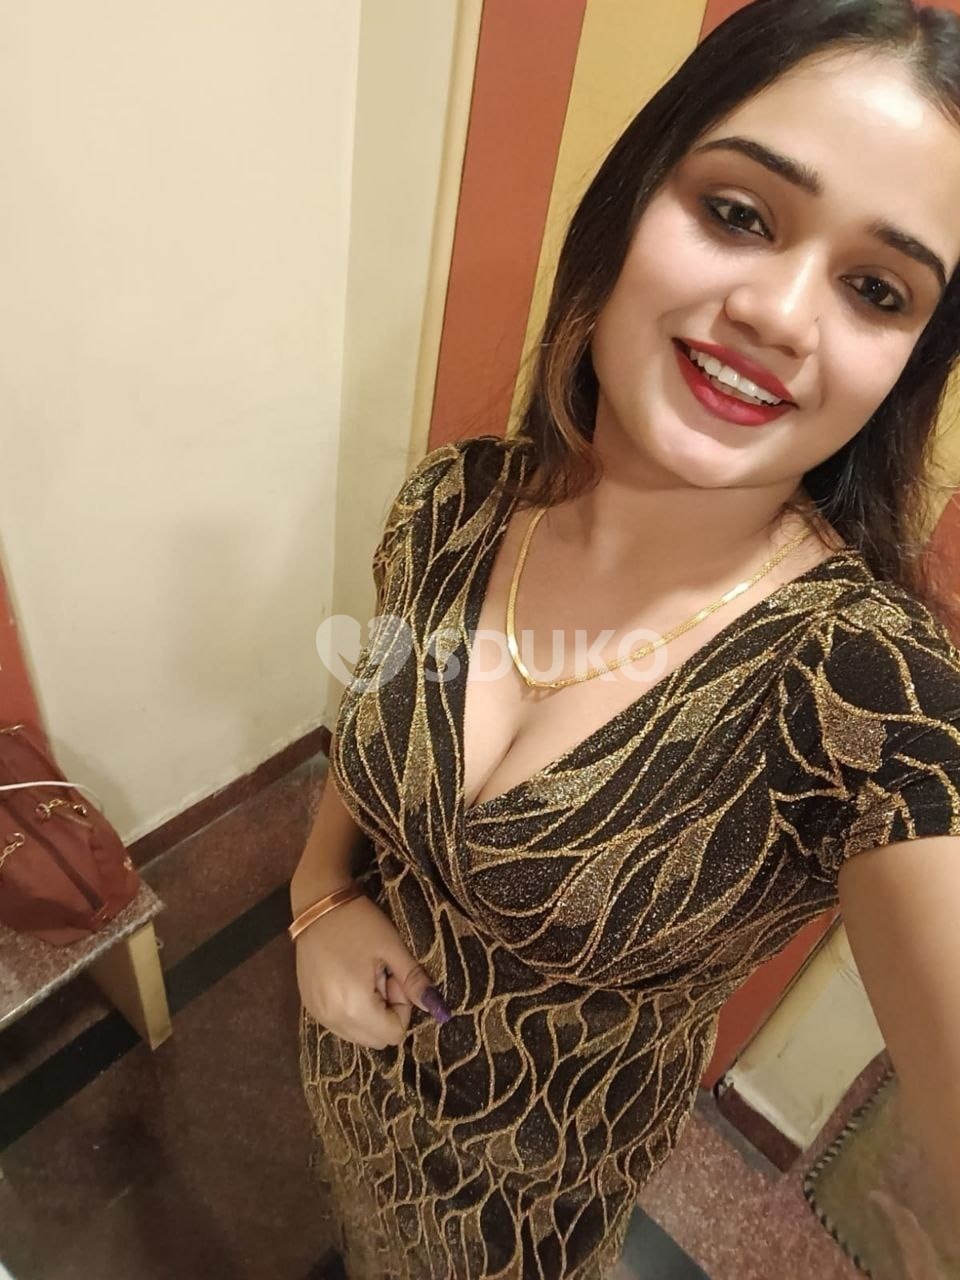 Bhosari..low price 🥰100% SAFE AND SECURE TODAY LOW PRICE UNLIMITED ENJOY HOT COLLEGE GIRL HOUSEWIFE AUNTIES AVAILABLE